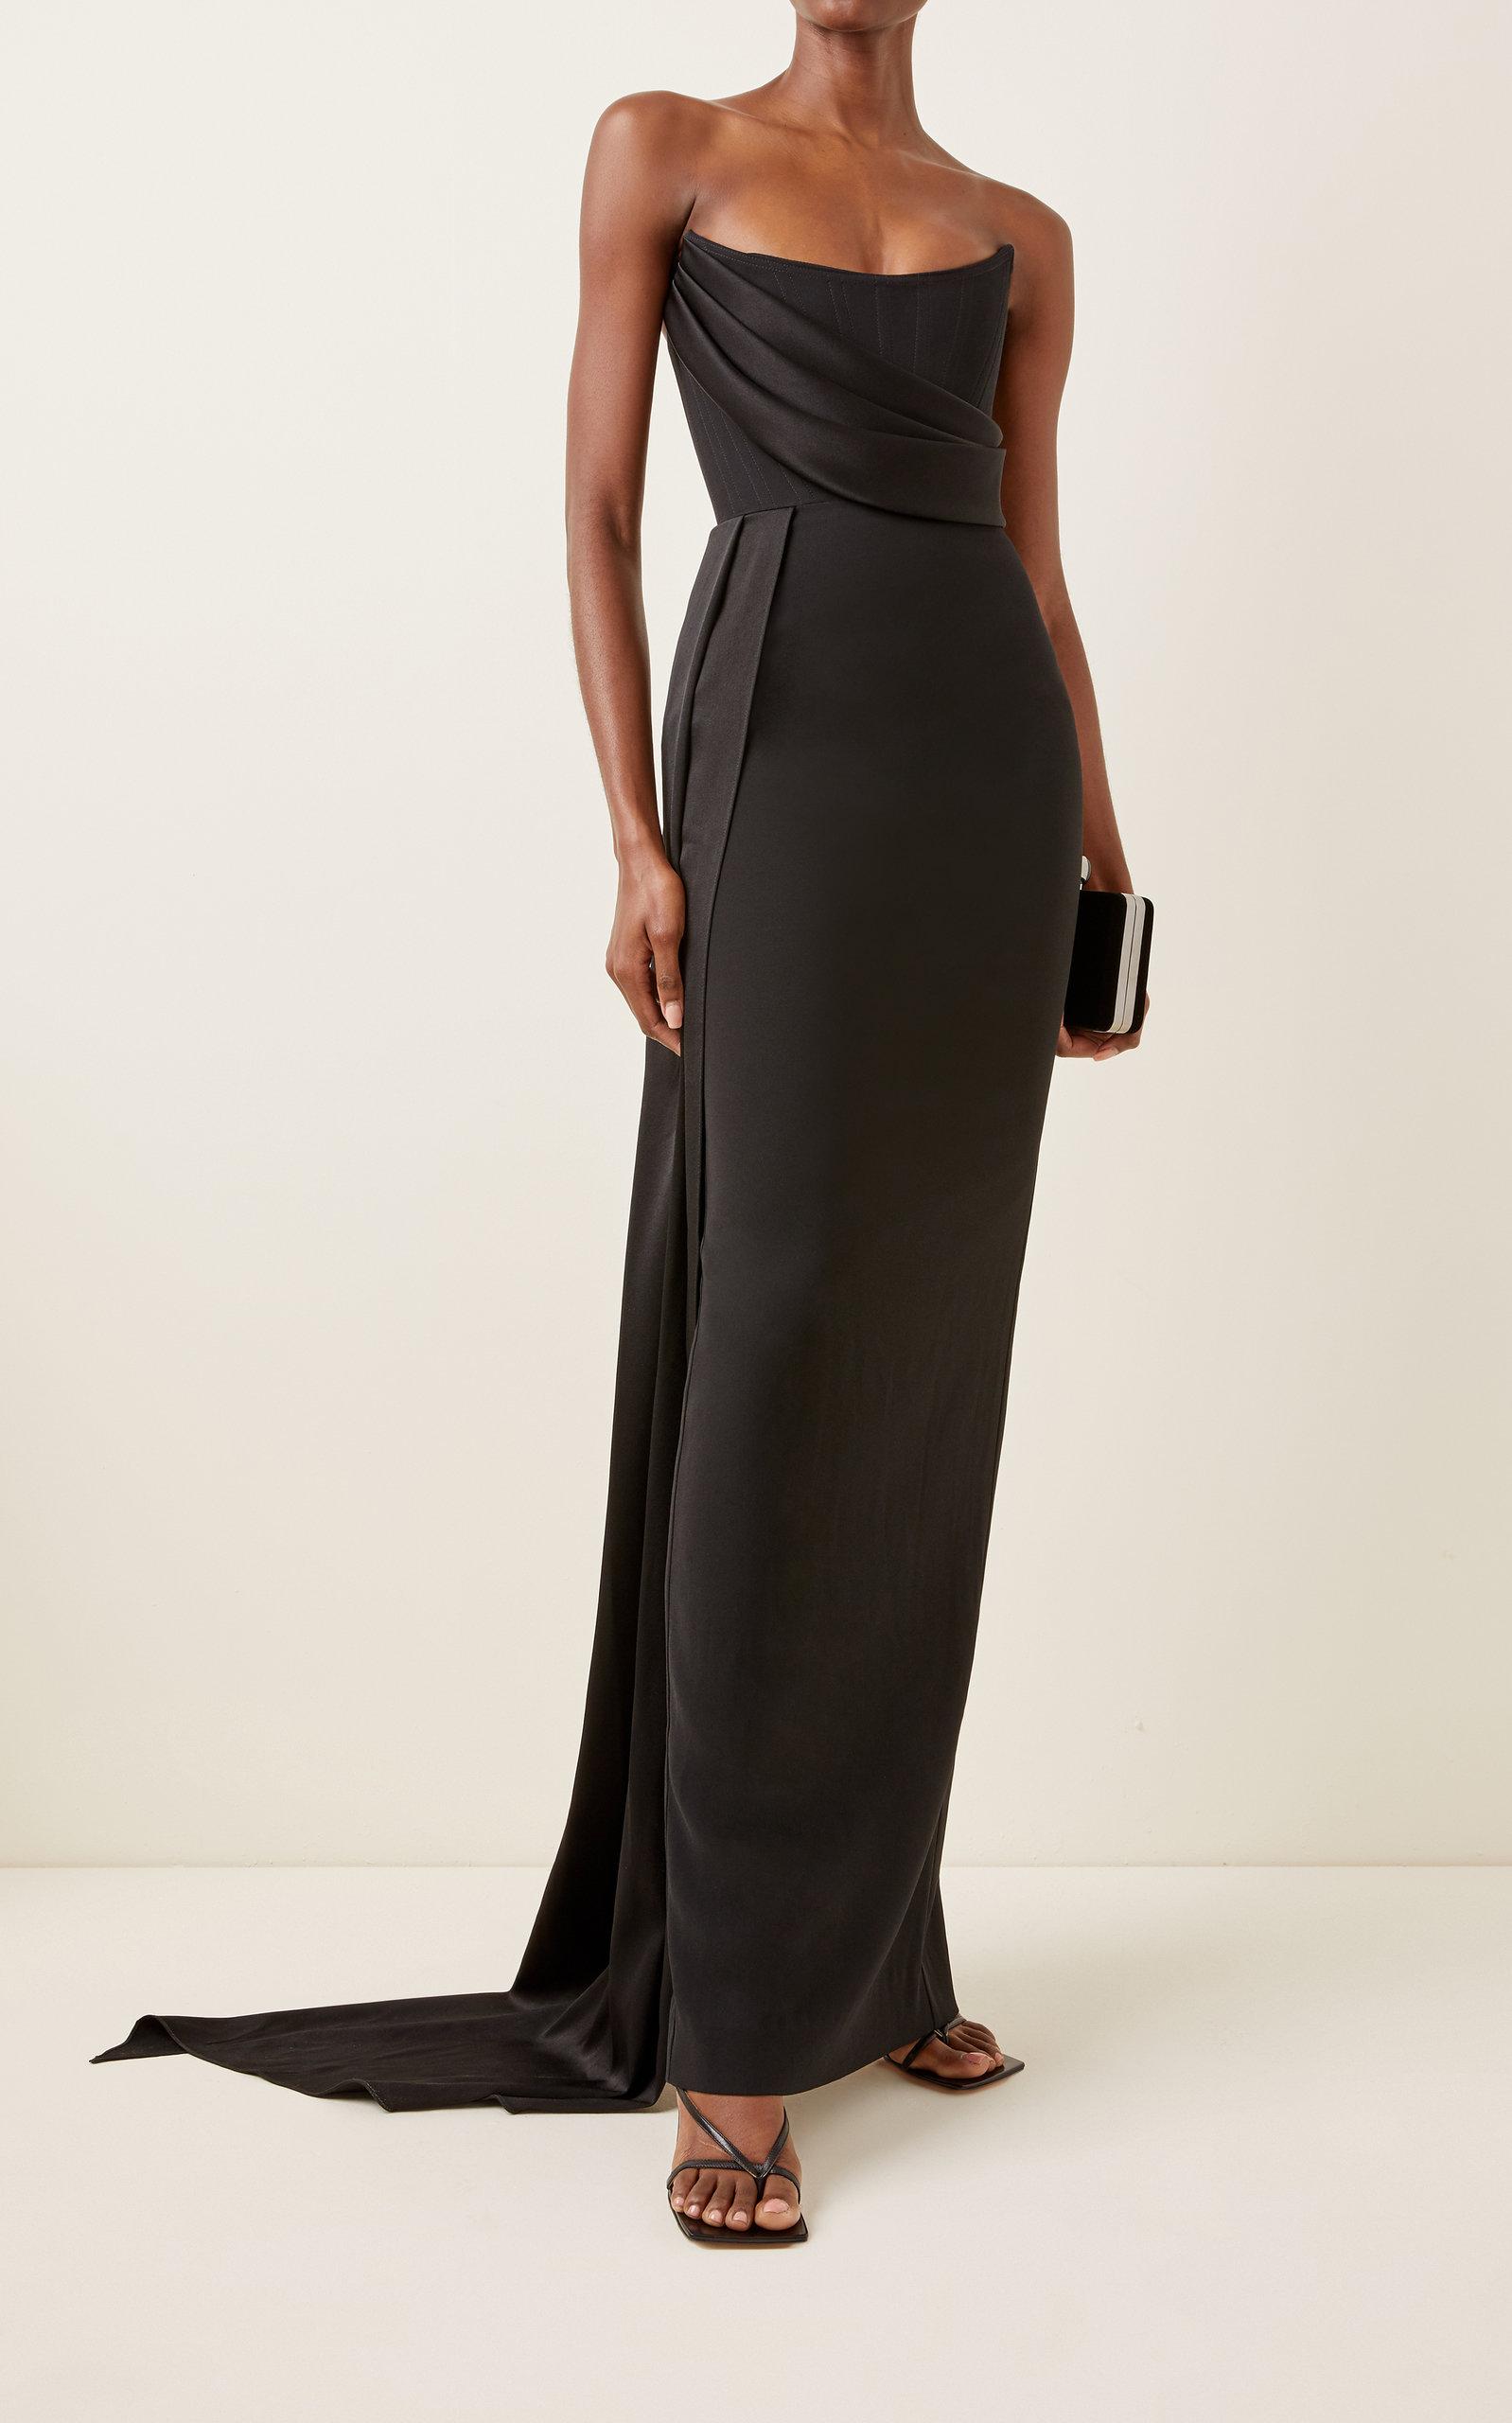 Alex Perry Kirby Drape-detailed Satin Crepe Strapless Gown in Black - Lyst